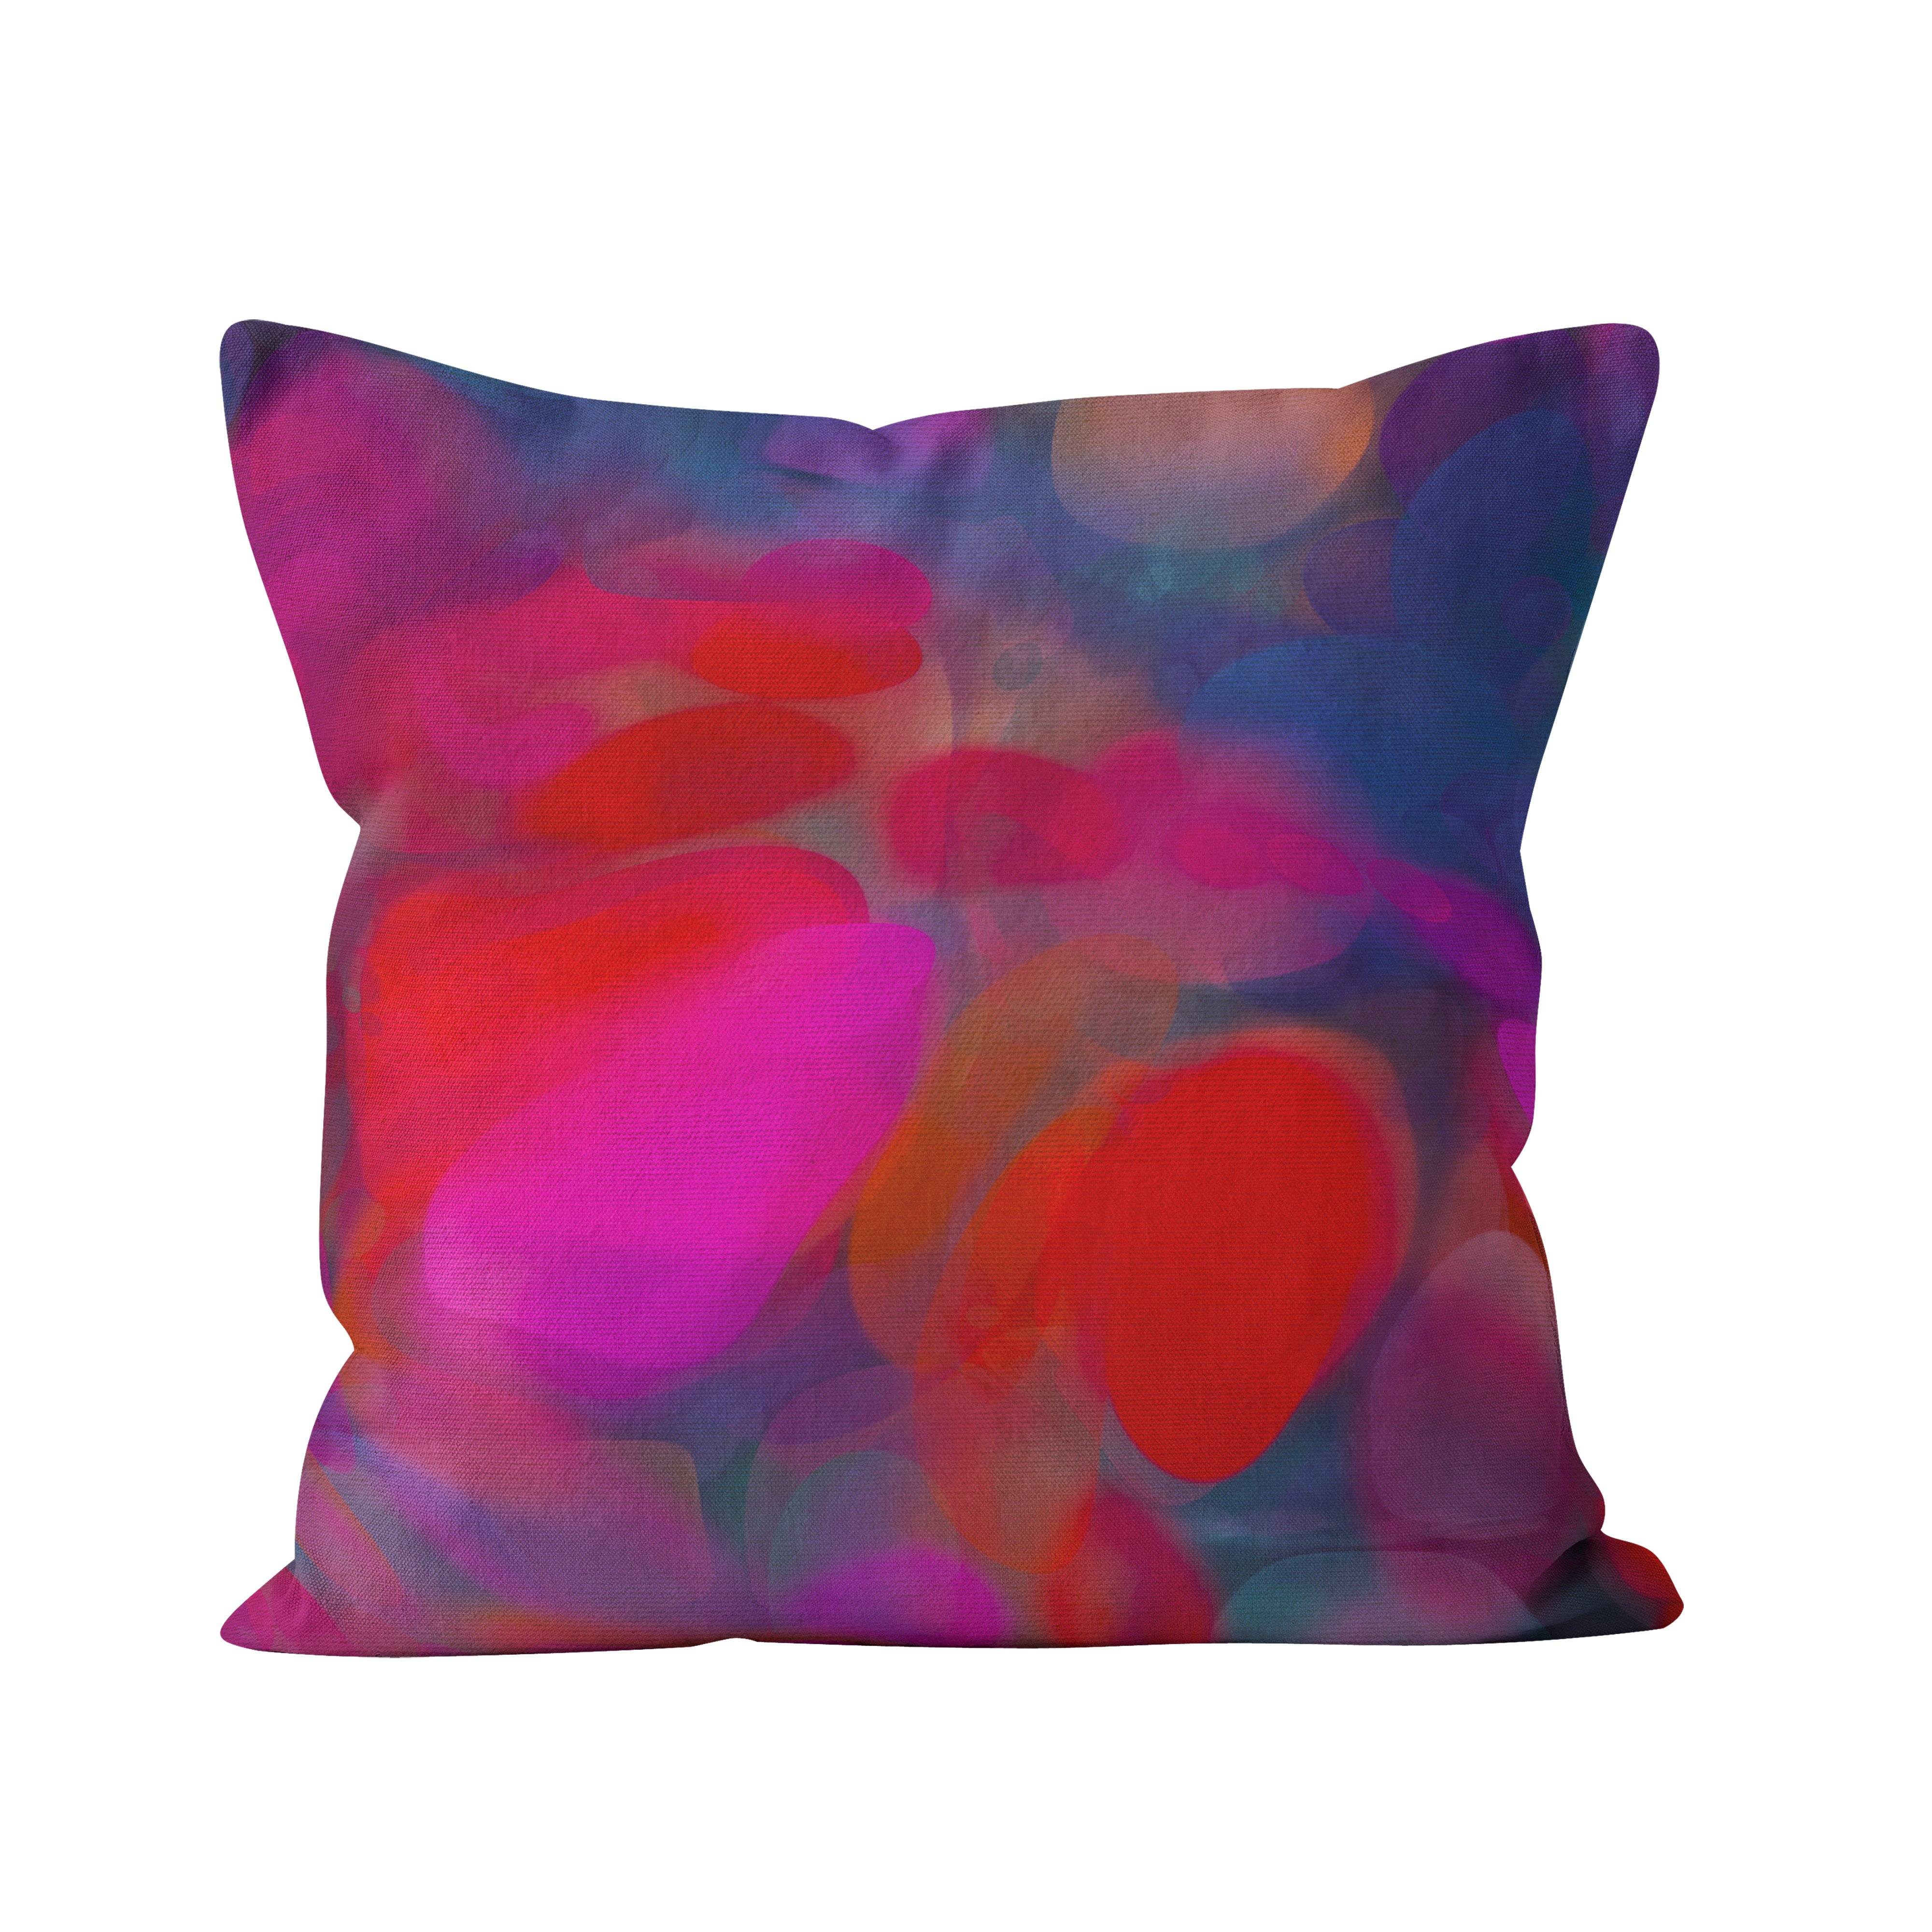 Orbs Blue, Red, & Pink Cushion - Louise Mead